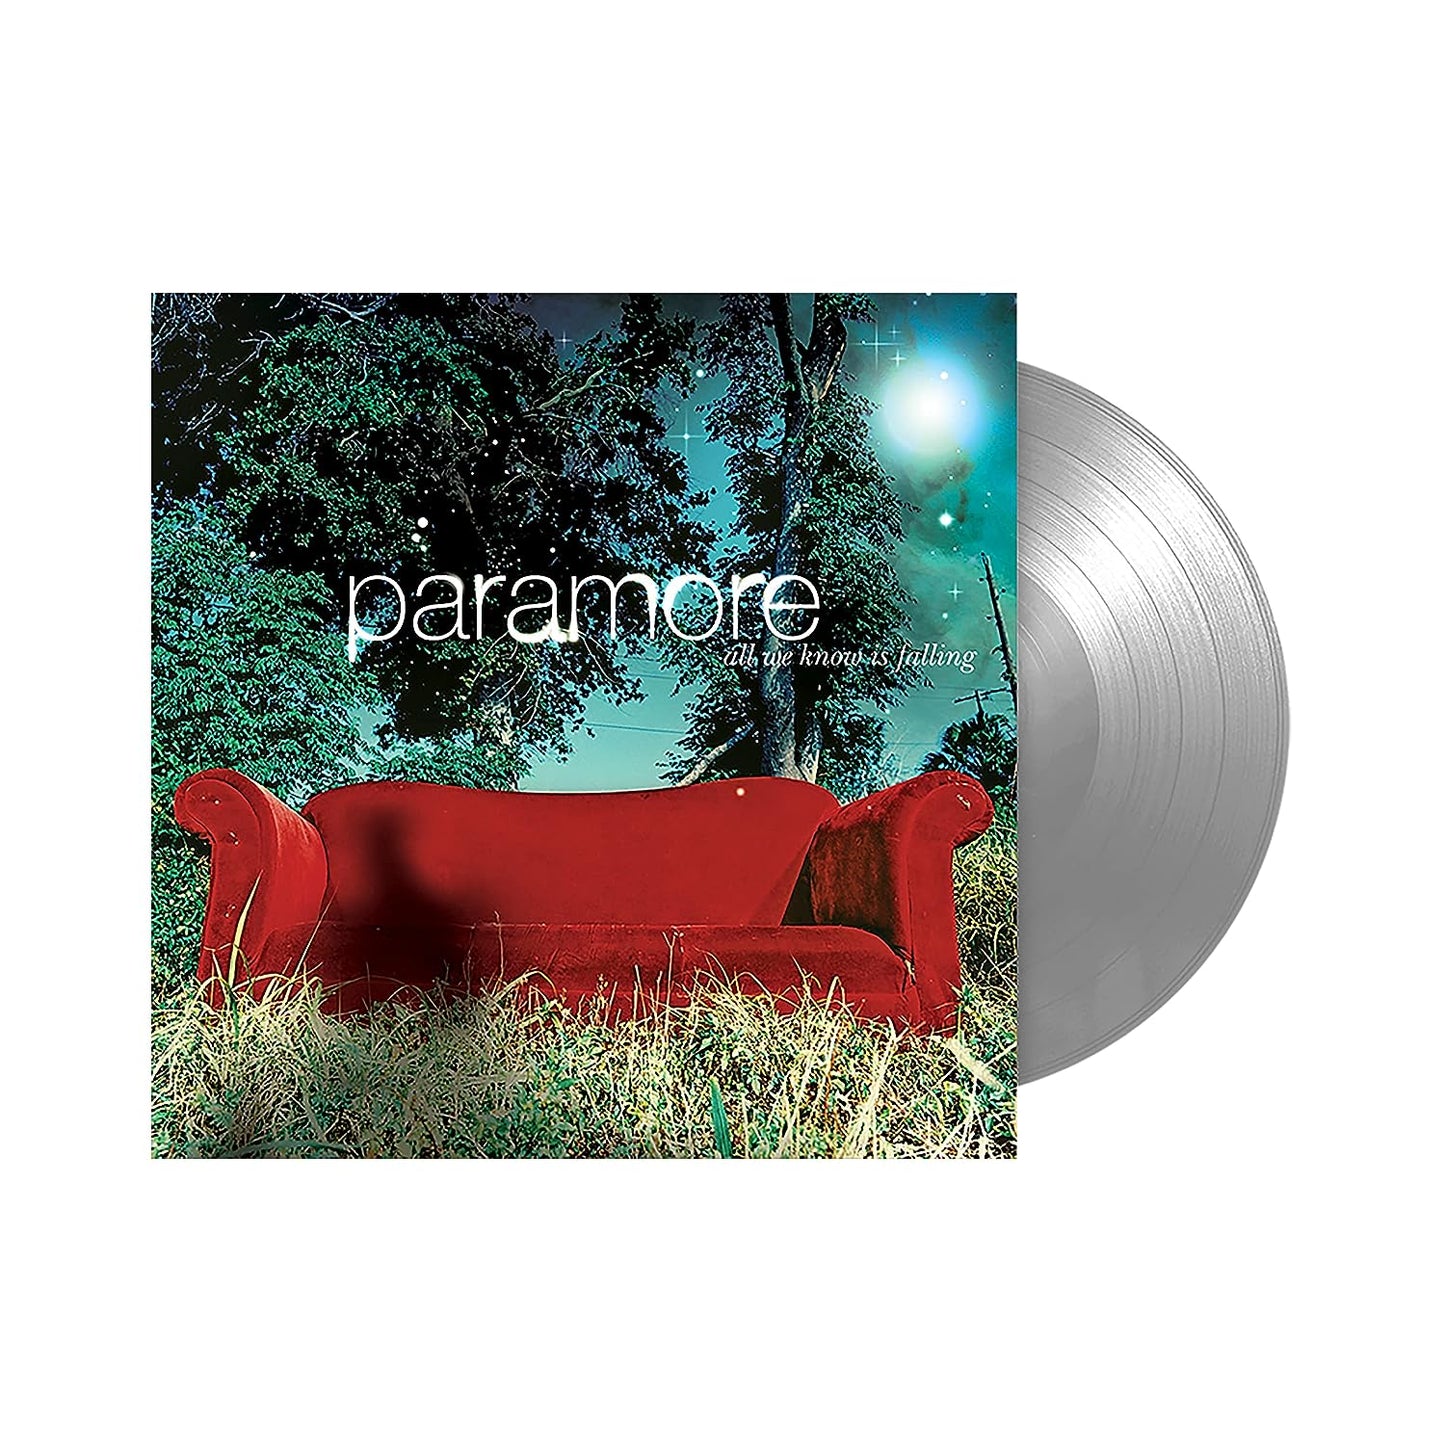 Paramore's "All We Know Is Falling" Silver Colored Vinyl LP Record